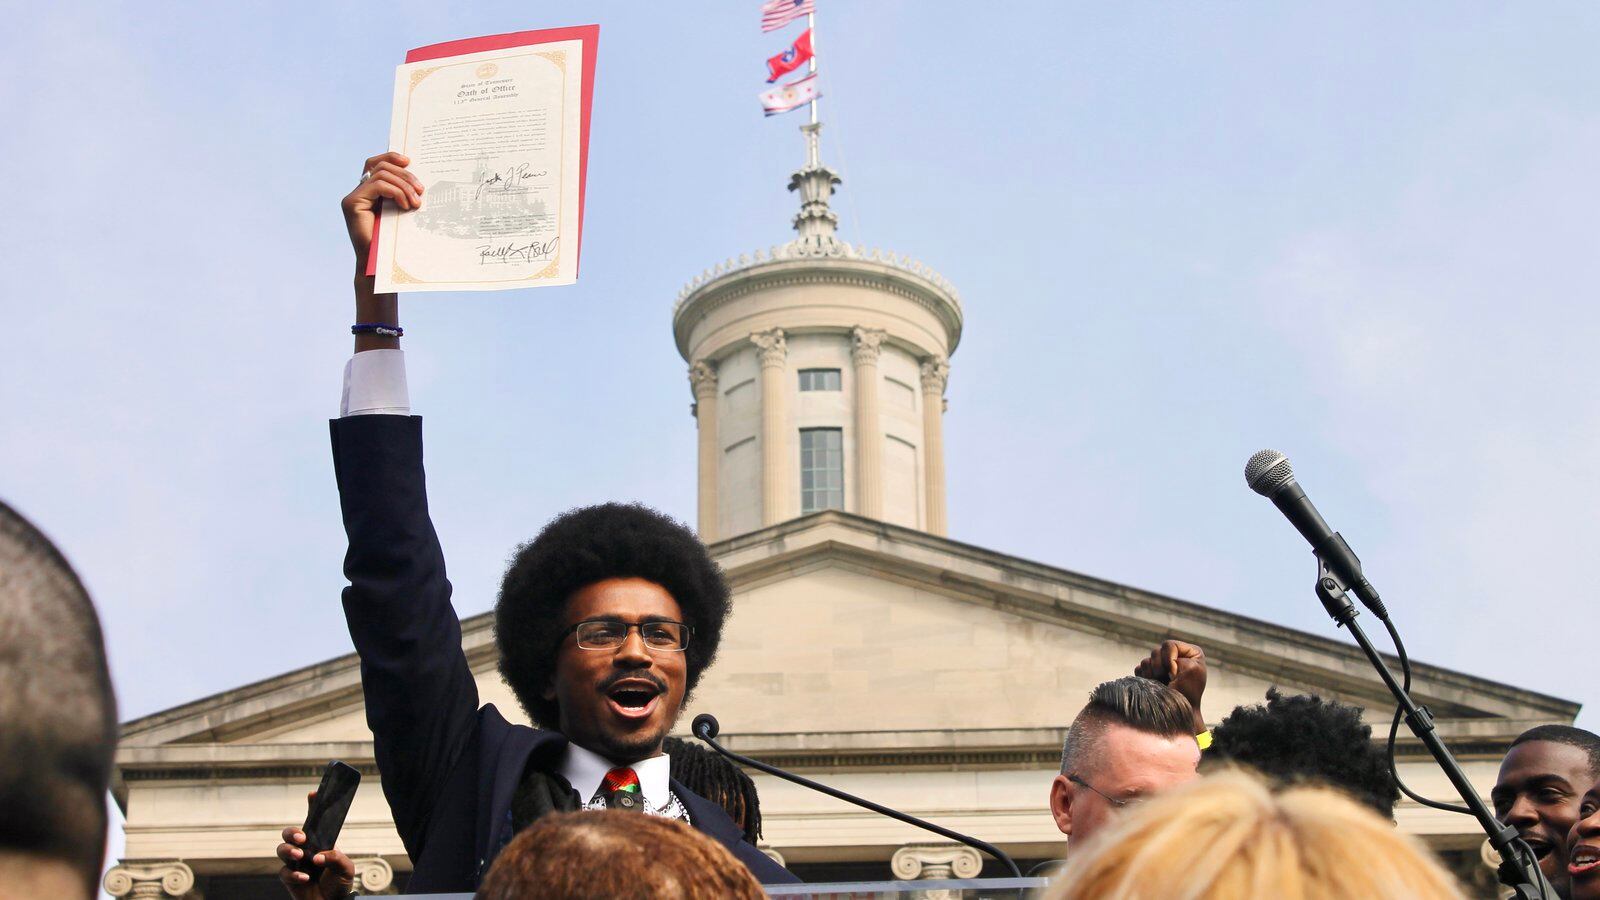 A man with glasses and an Afro style haircut stands with his hand in the air holding a piece of paper.